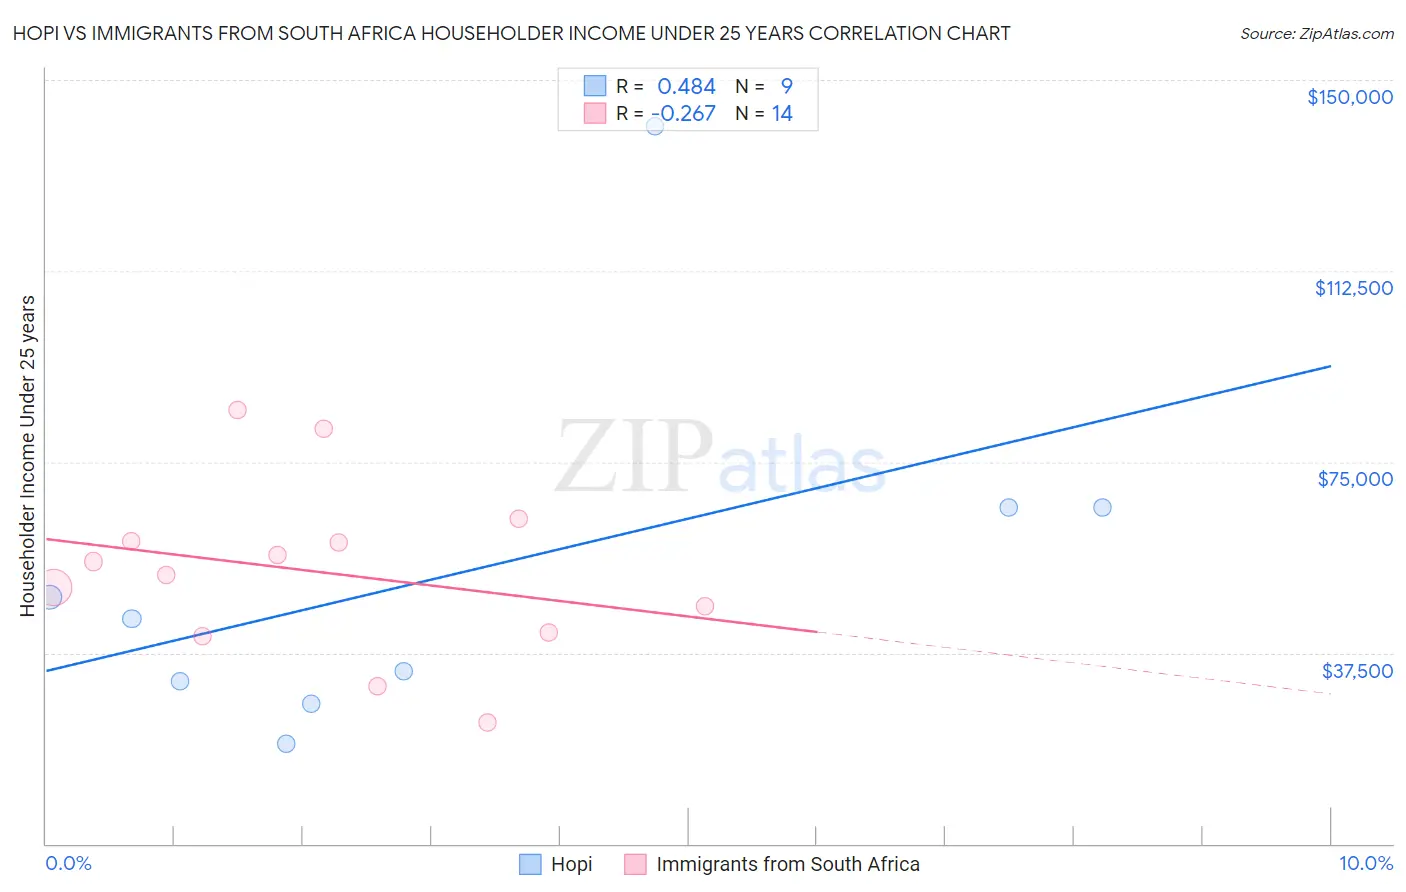 Hopi vs Immigrants from South Africa Householder Income Under 25 years